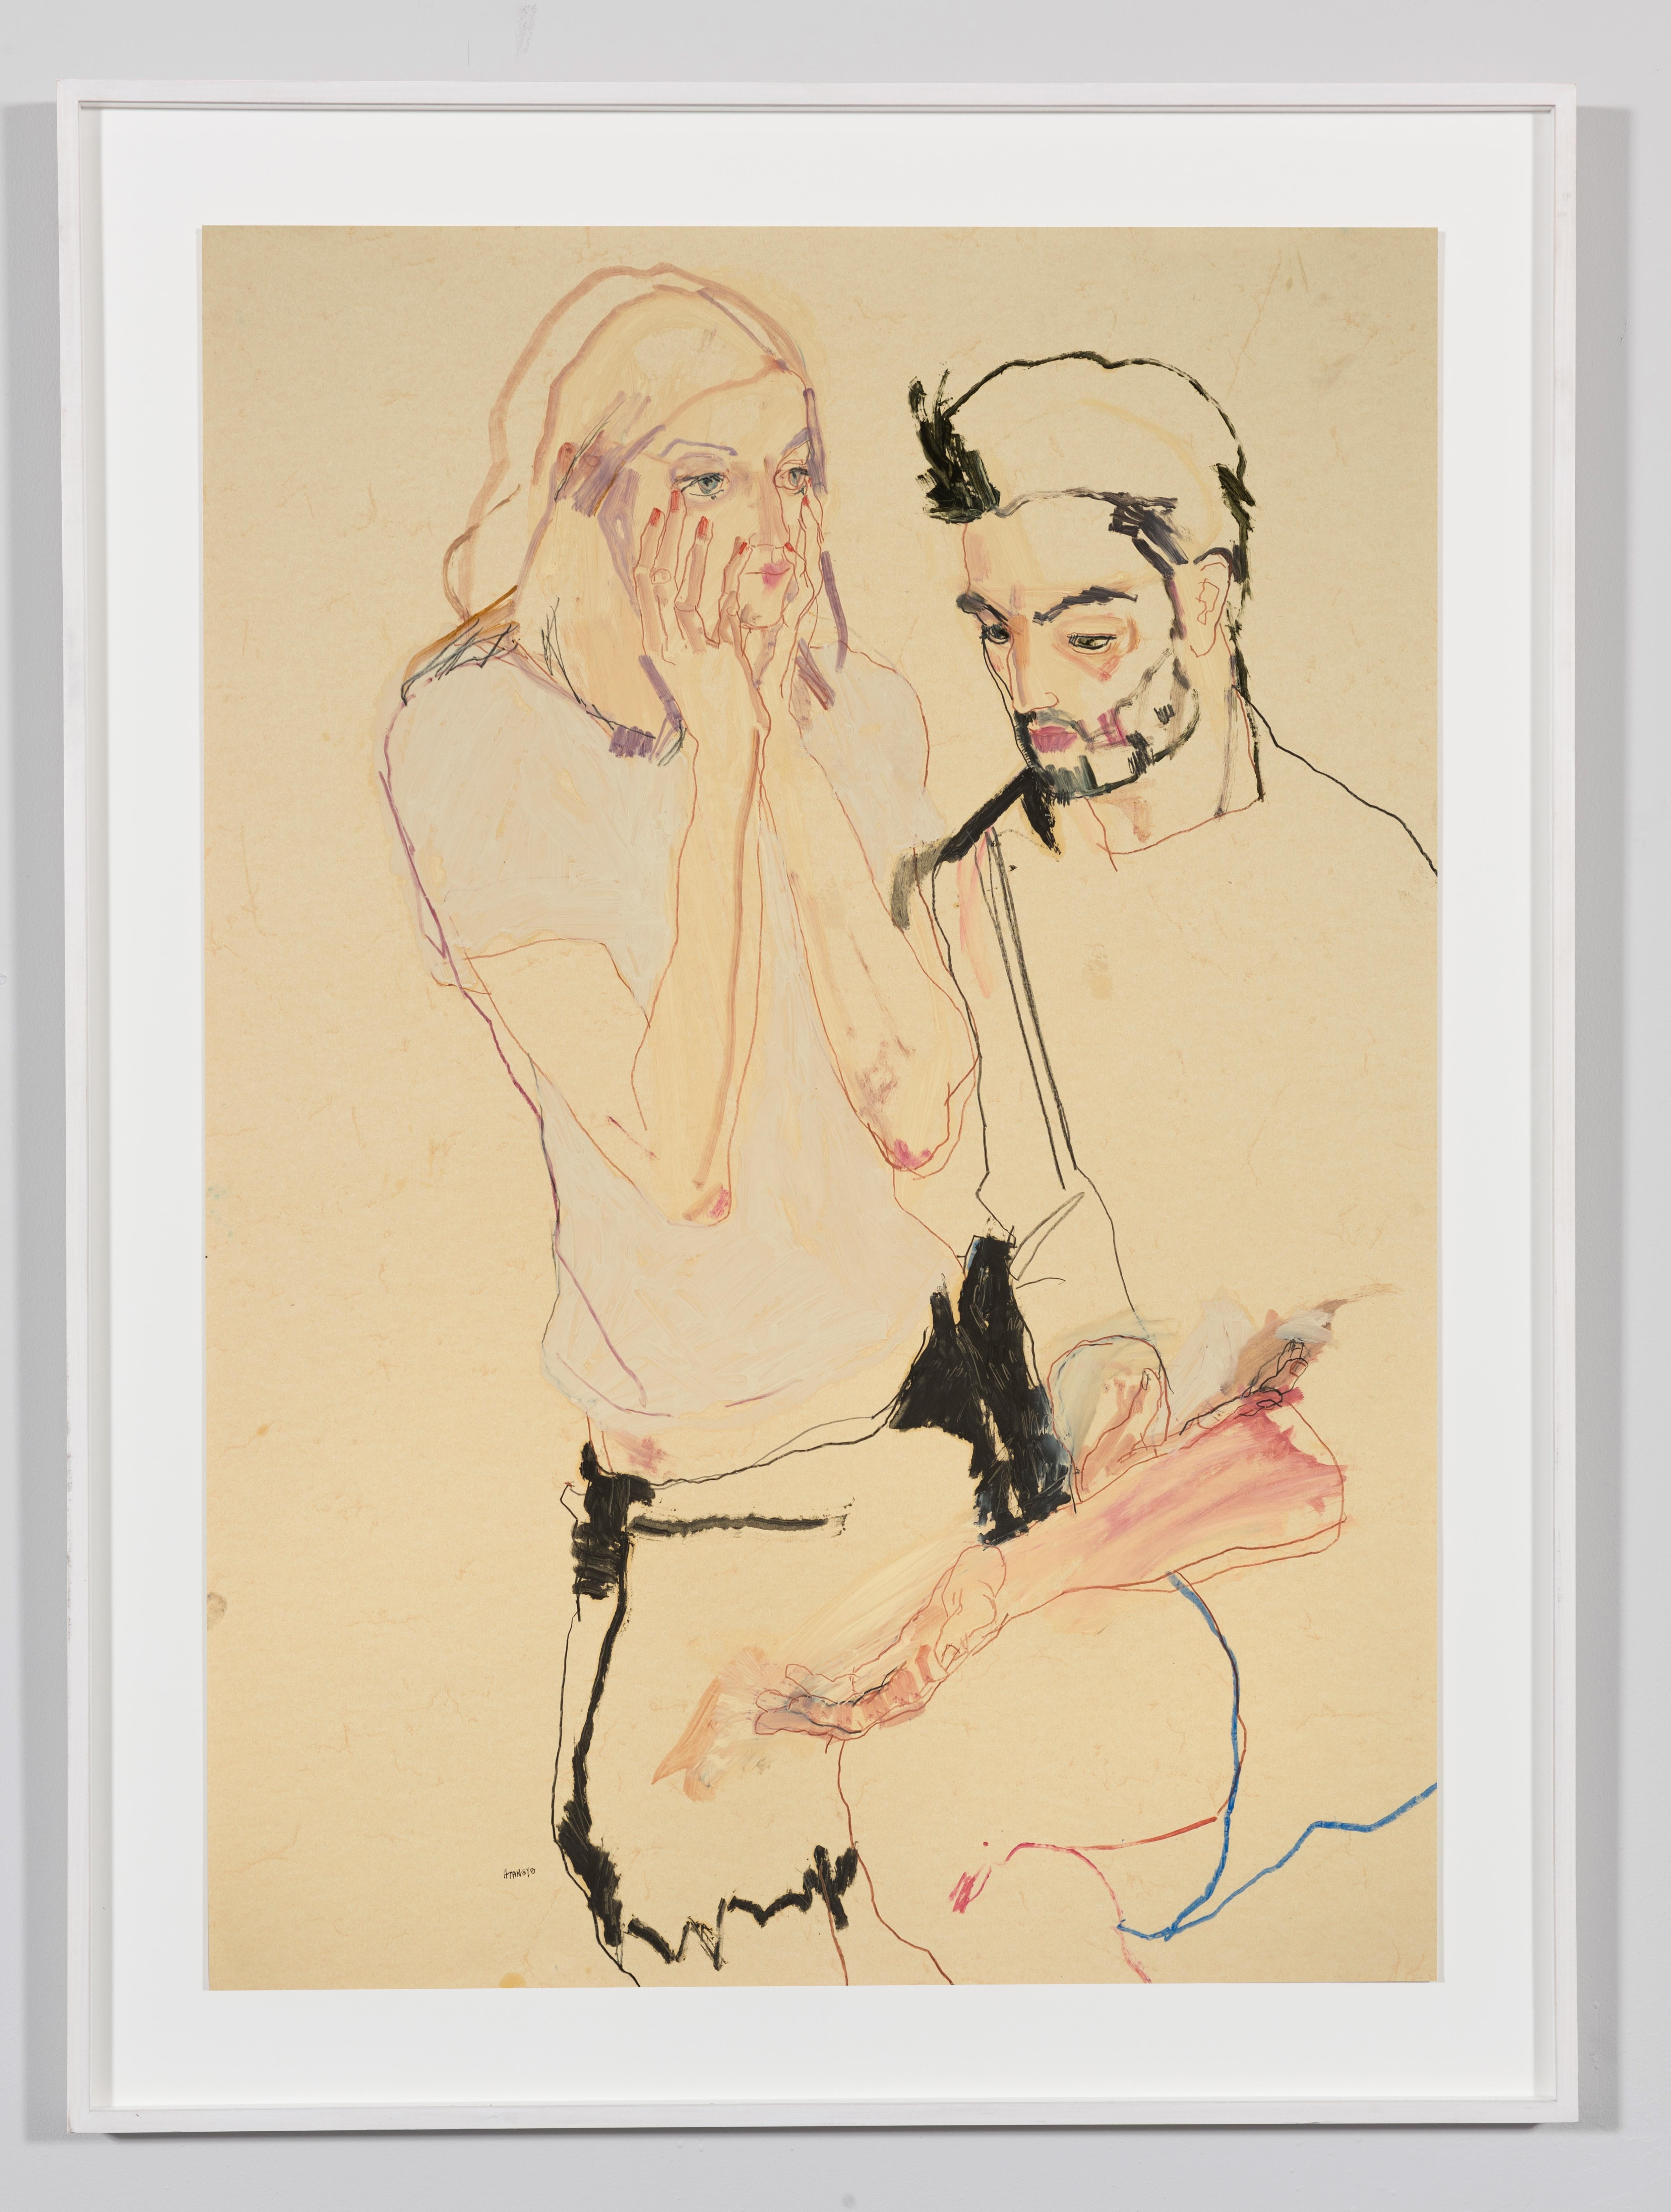 Sarah & Asad (Hands to Face), Mixed media on Pergamenata parchment - Painting by Howard Tangye